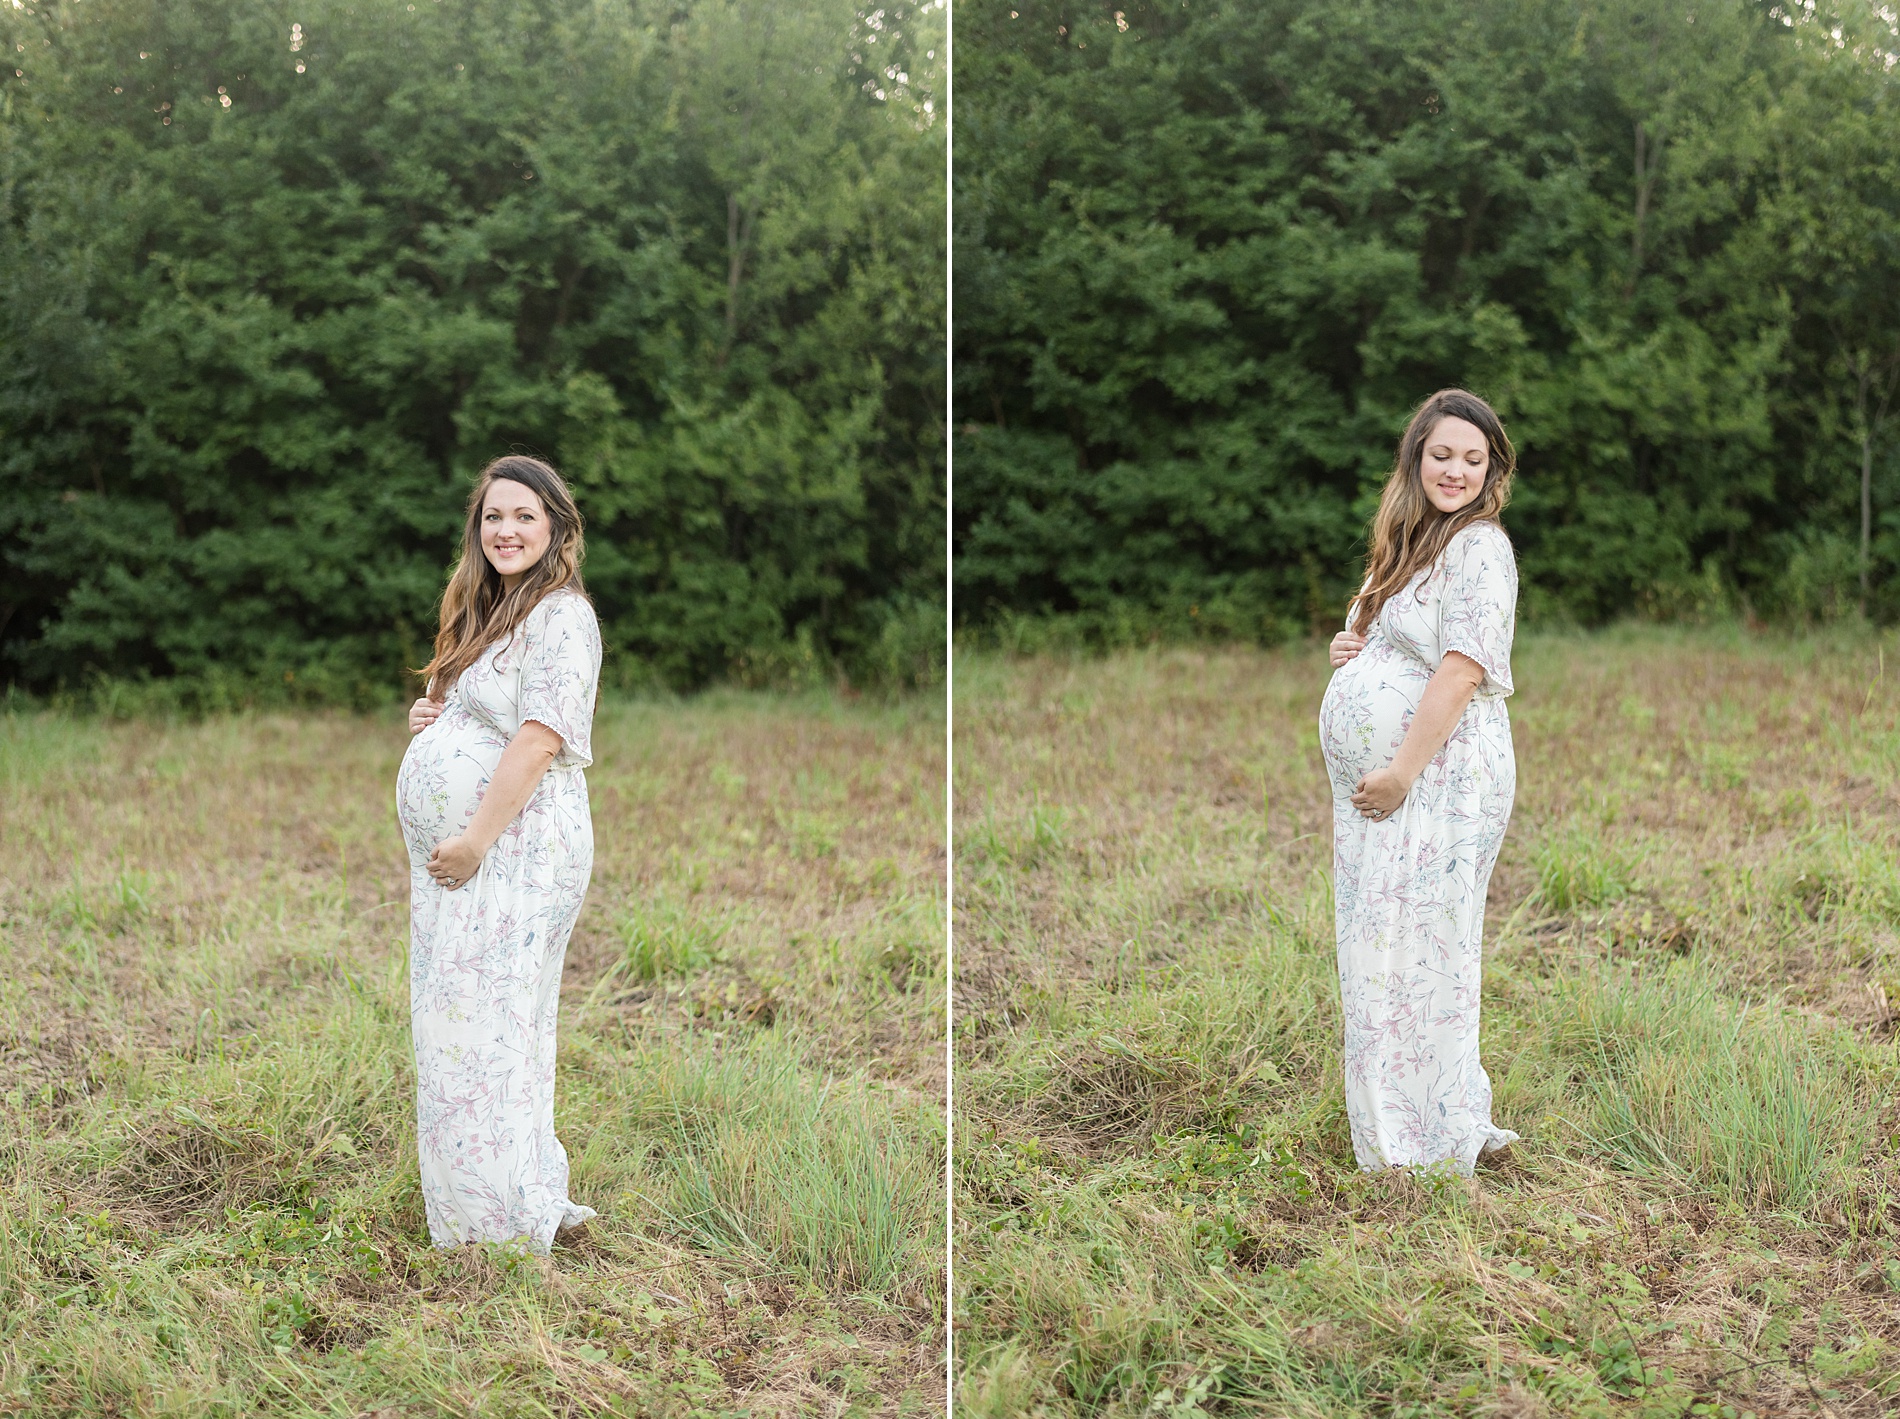 Arbor Hills Maternity Session in Plano TX